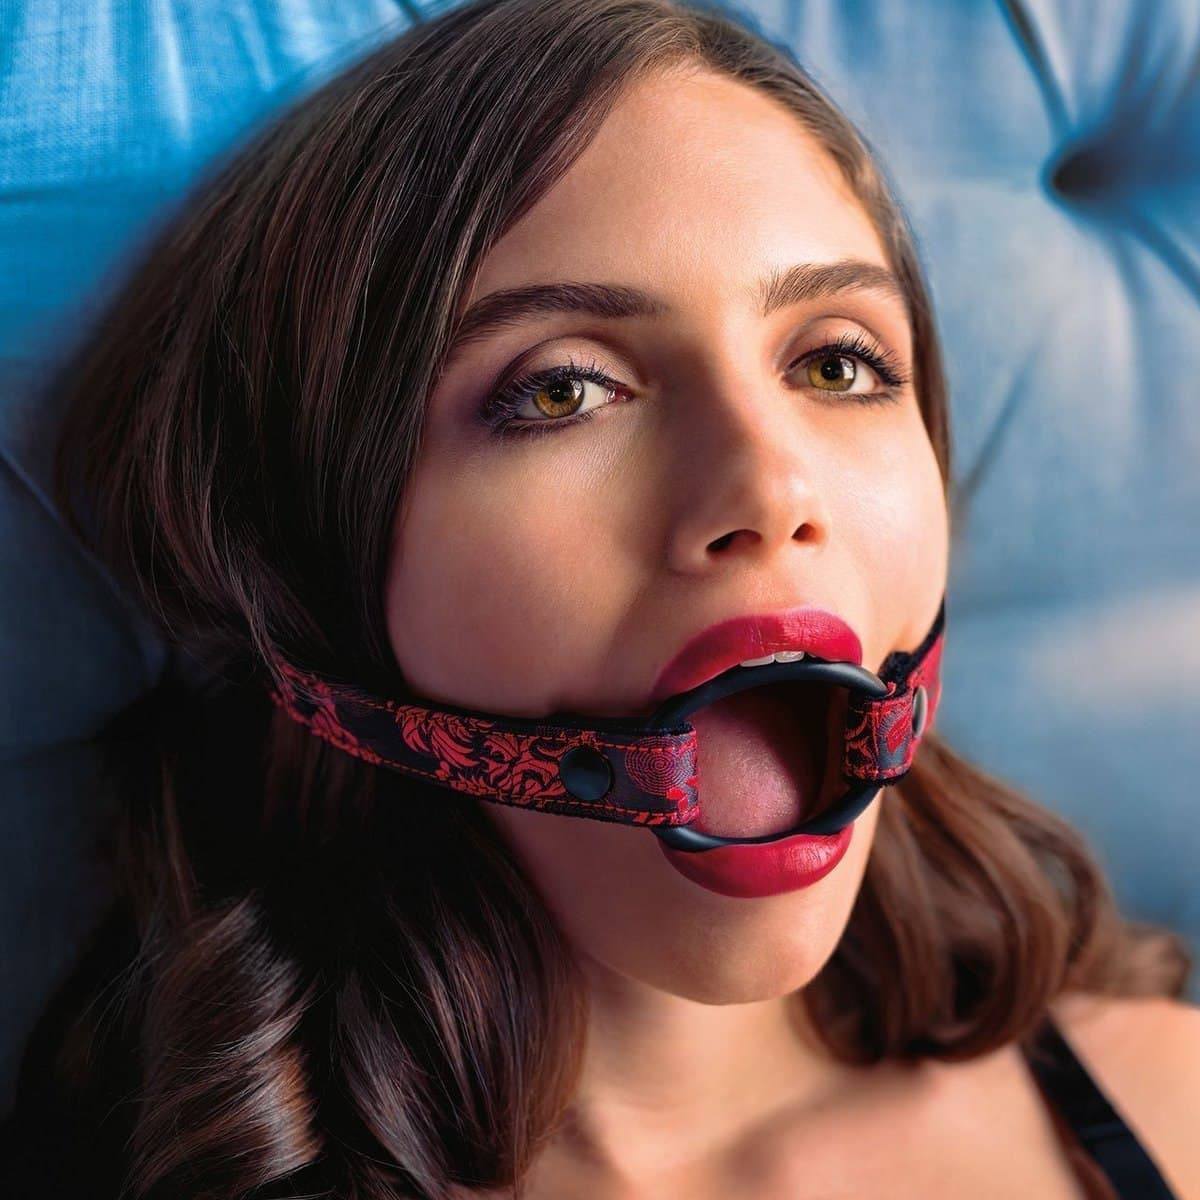 Ring gag drooling